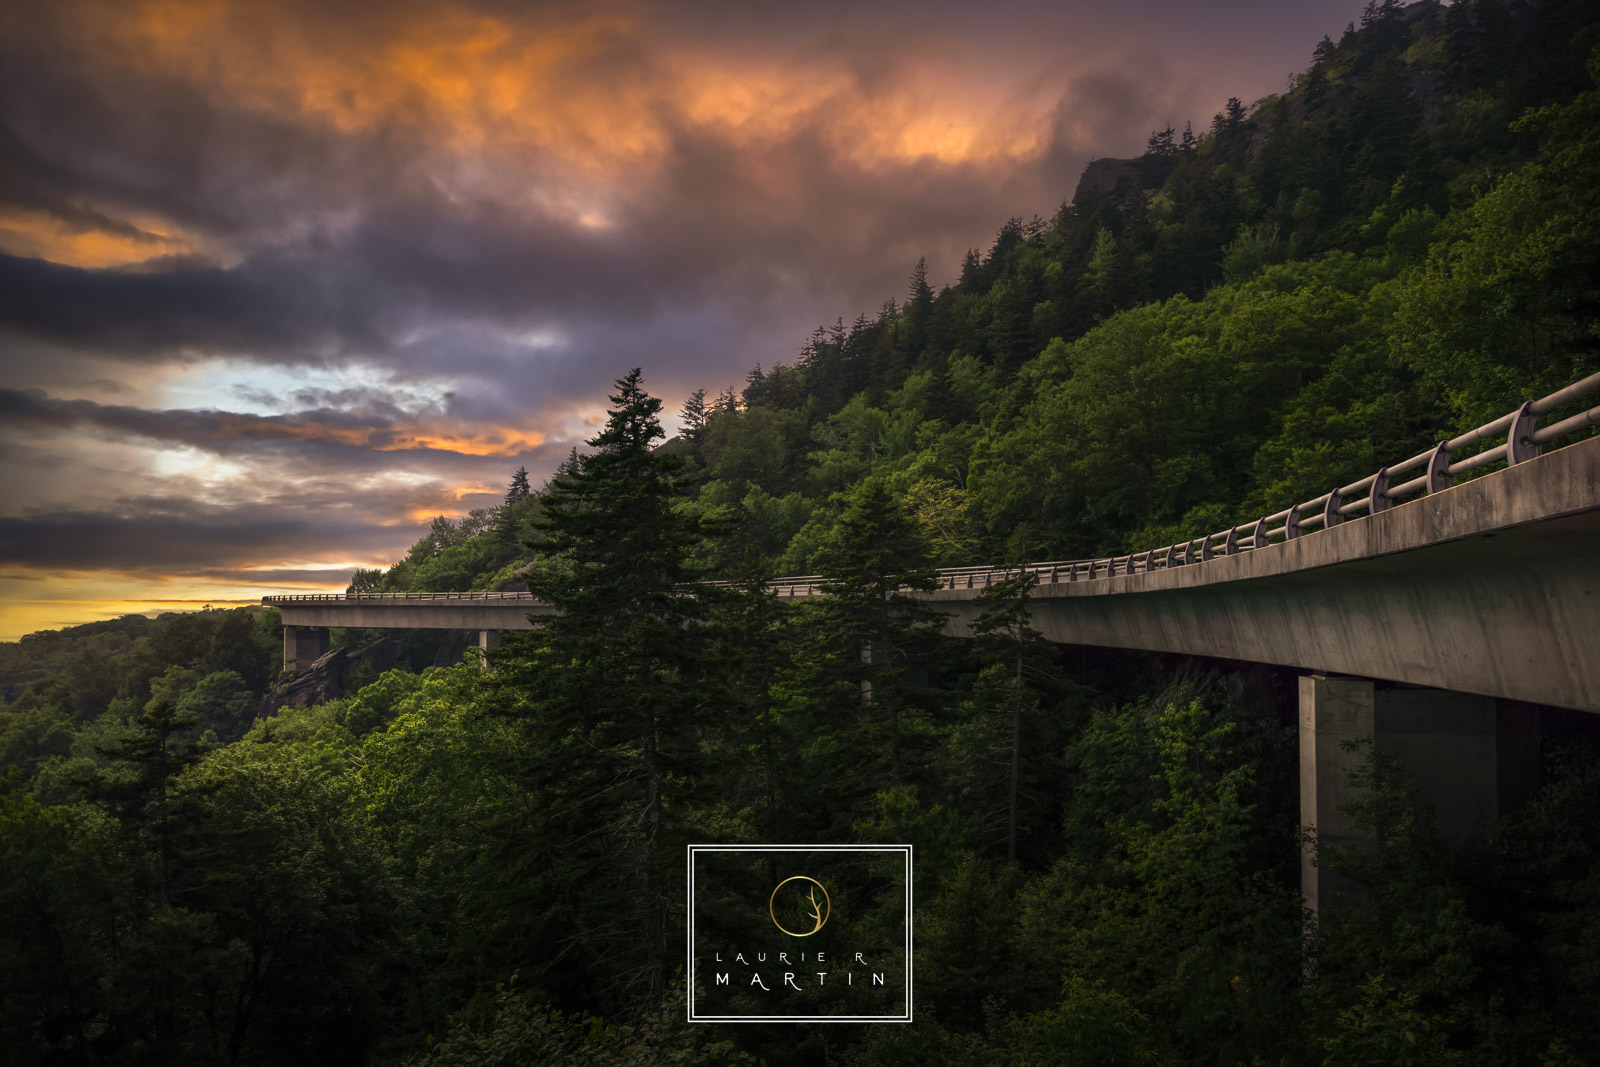 The Linn Cove Viaduct is a portion of the Parkway that has a stunning view over the Blue Ridge Mountains. There are several ways...